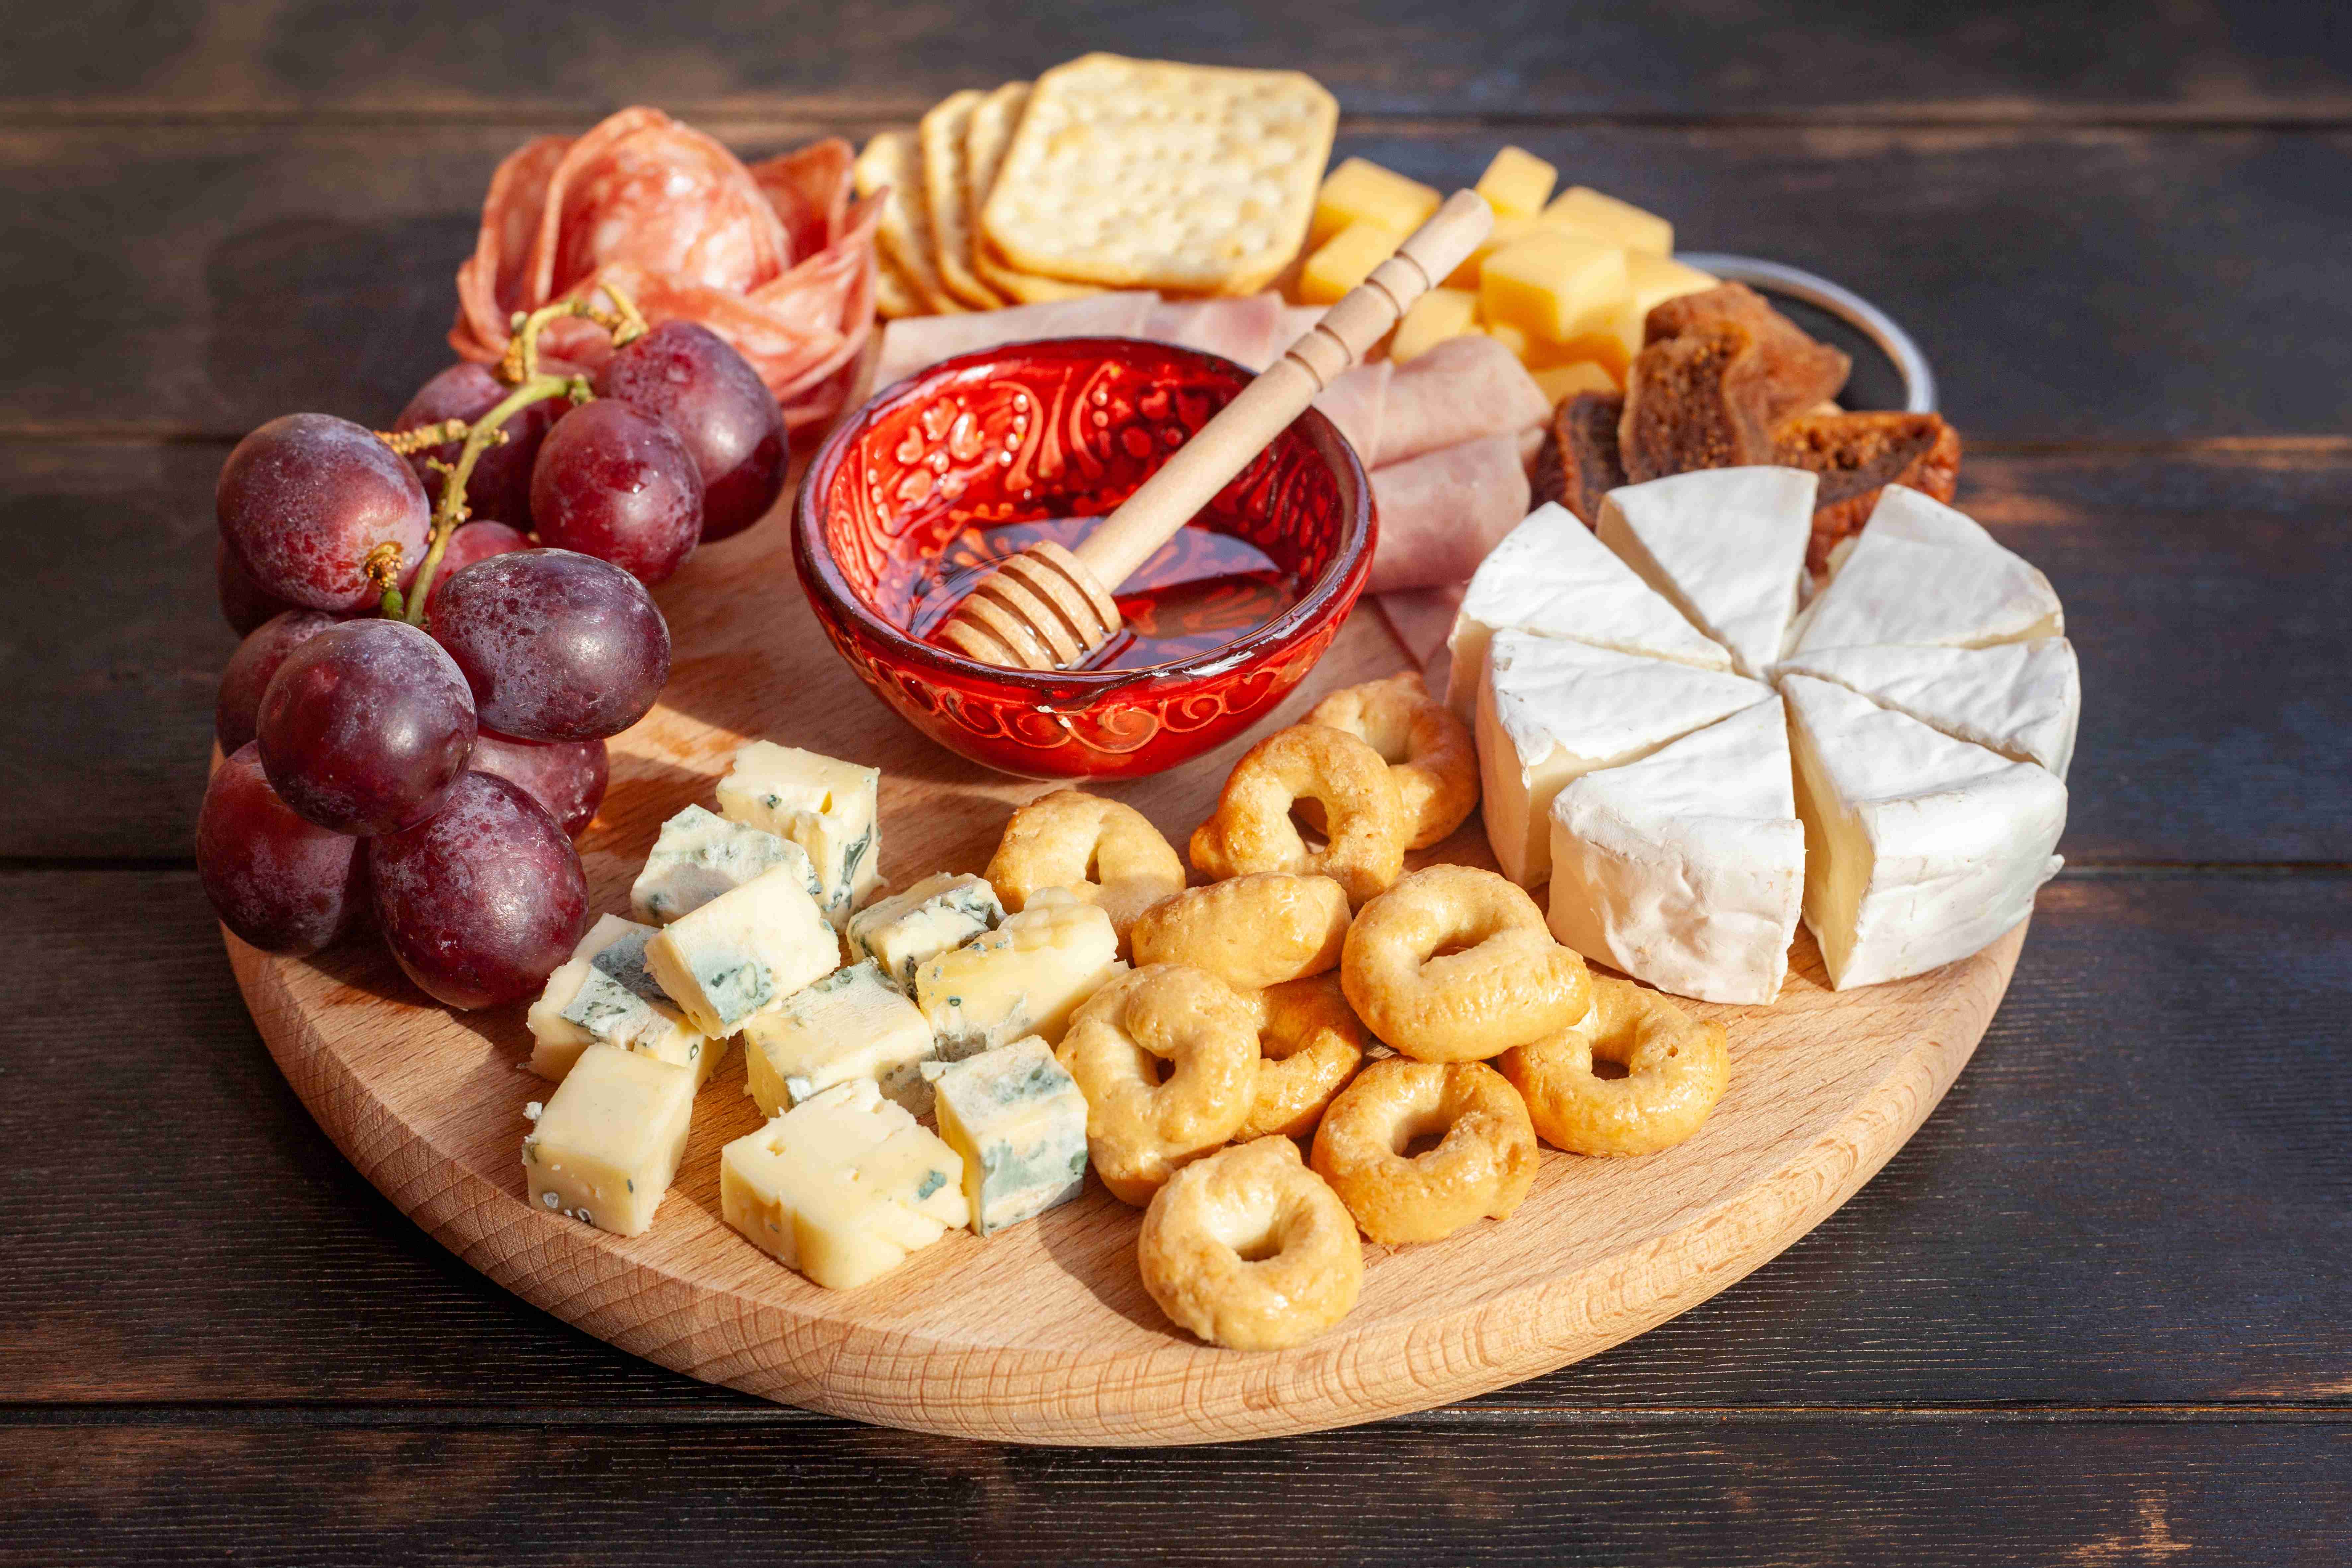 A delicious cheese board makes a great gift to celebrate Mother’s Day.